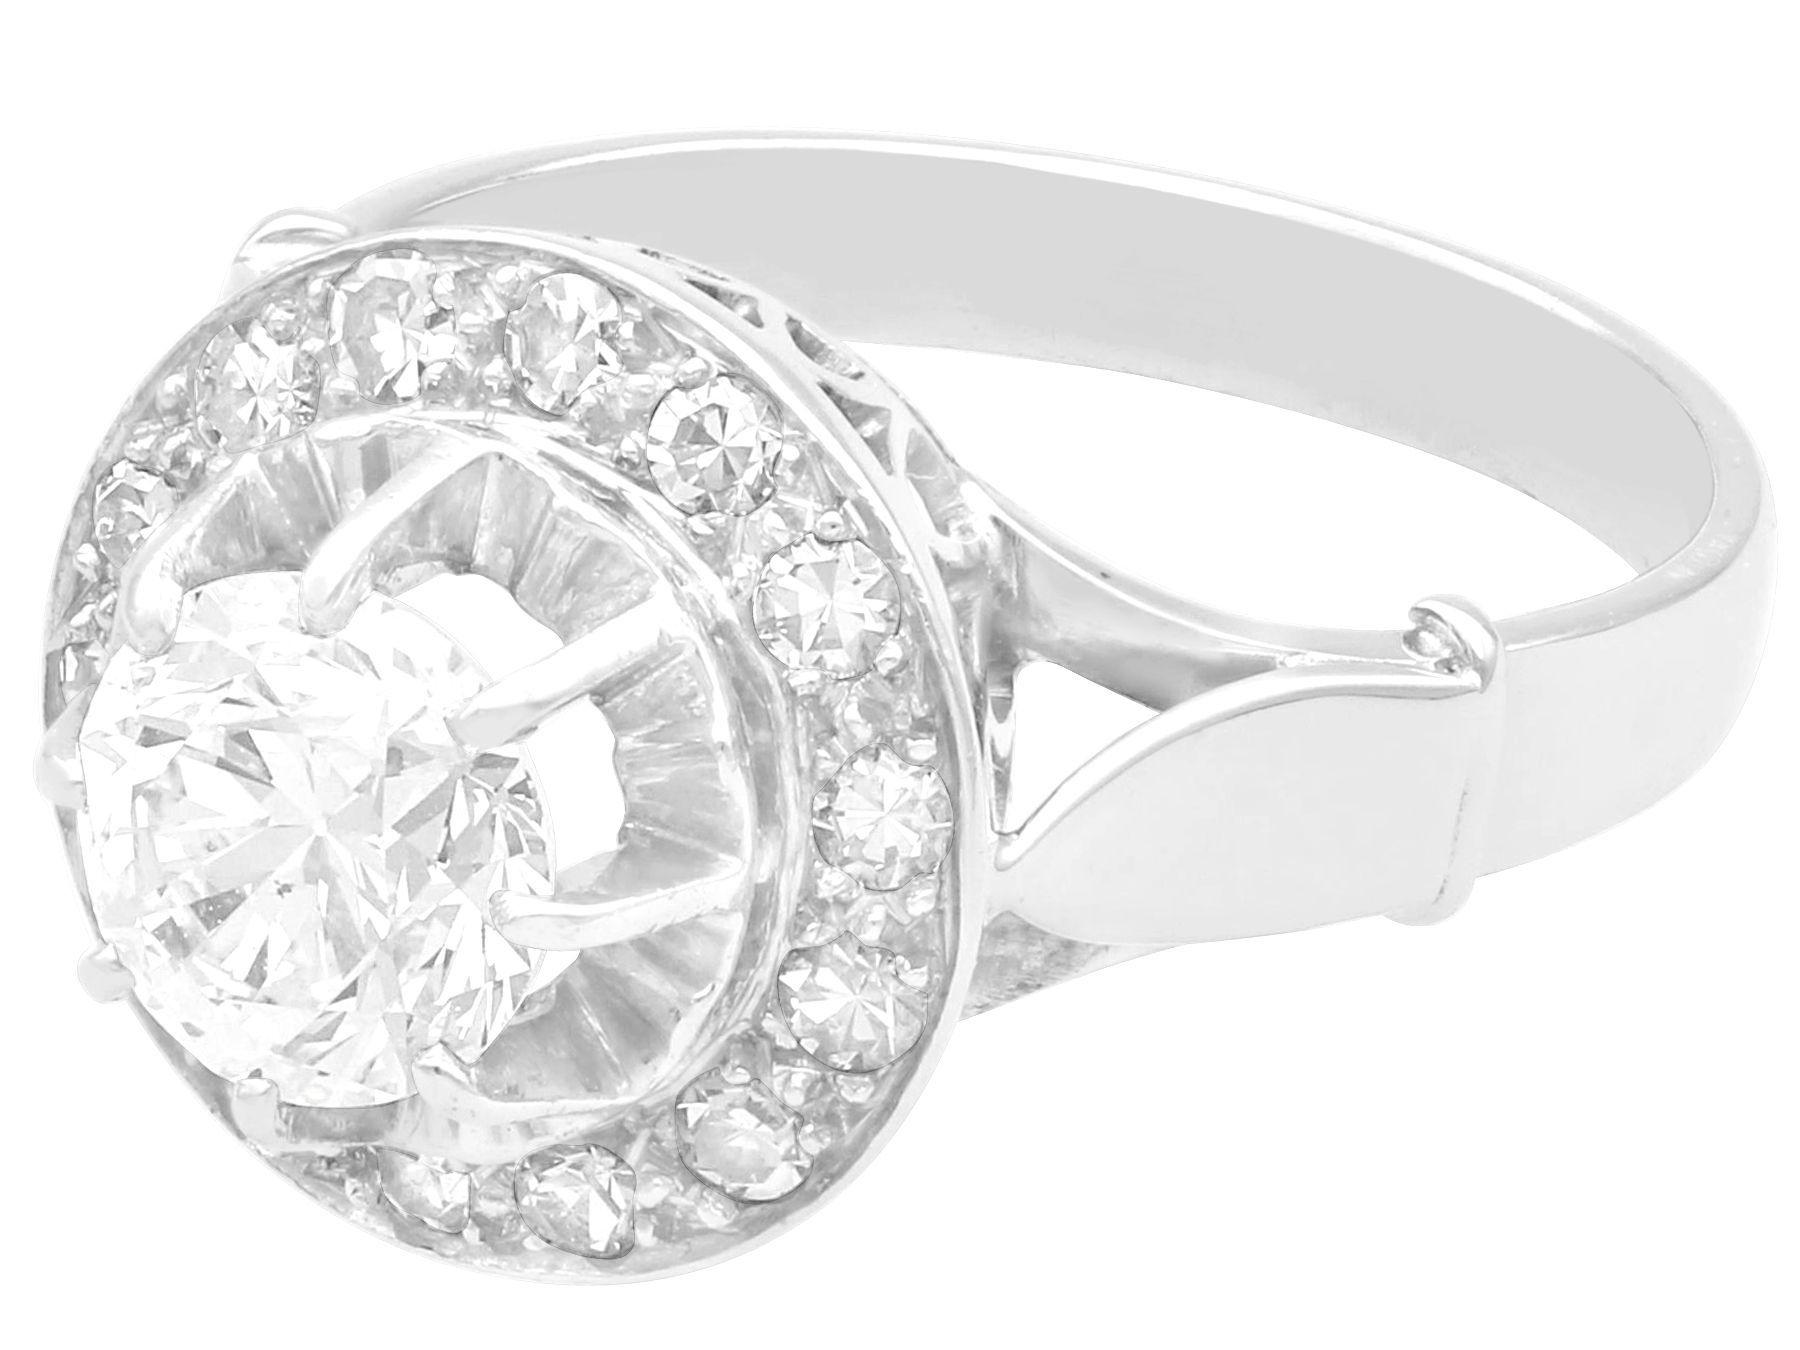 A stunning, fine and impressive antique 1.36 carat diamond, 18 karat white gold ring with platinum settings; part of our diverse diamond cocktail ring collections.

This stunning, fine and impressive diamond cluster ring has been crafted in 18k